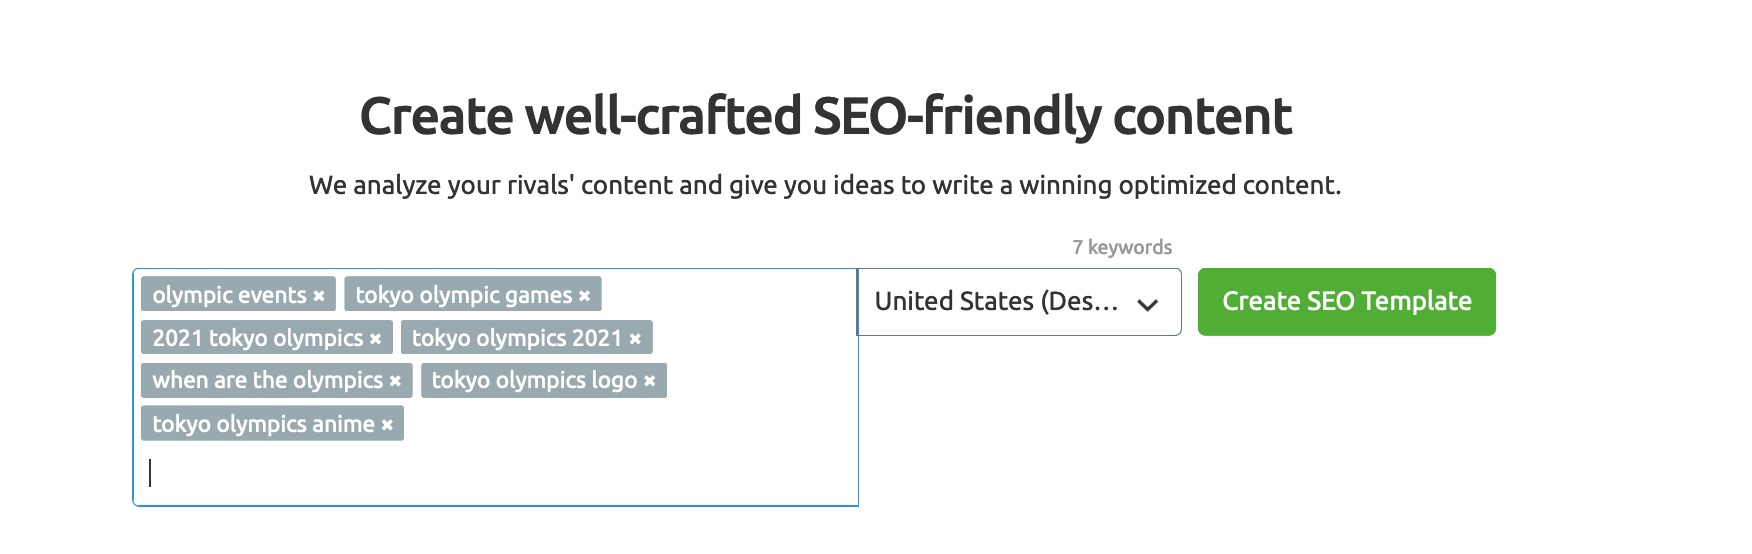 seo content template